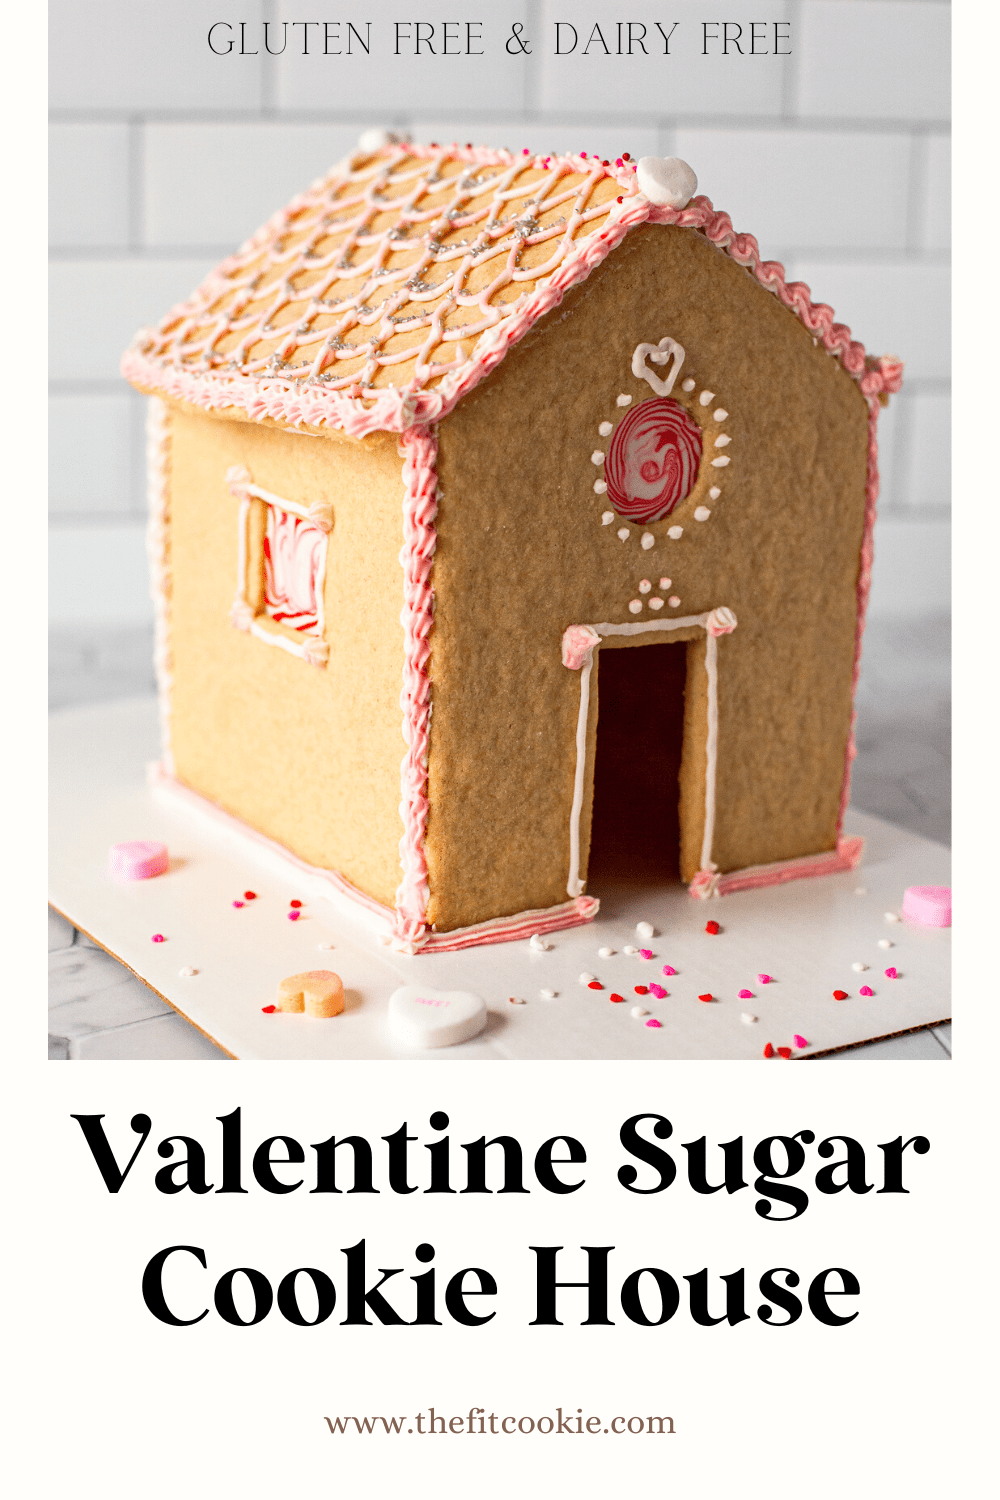 photo of a sugar cookie house in a graphic design with text that says "valentine sugar cookie house". 